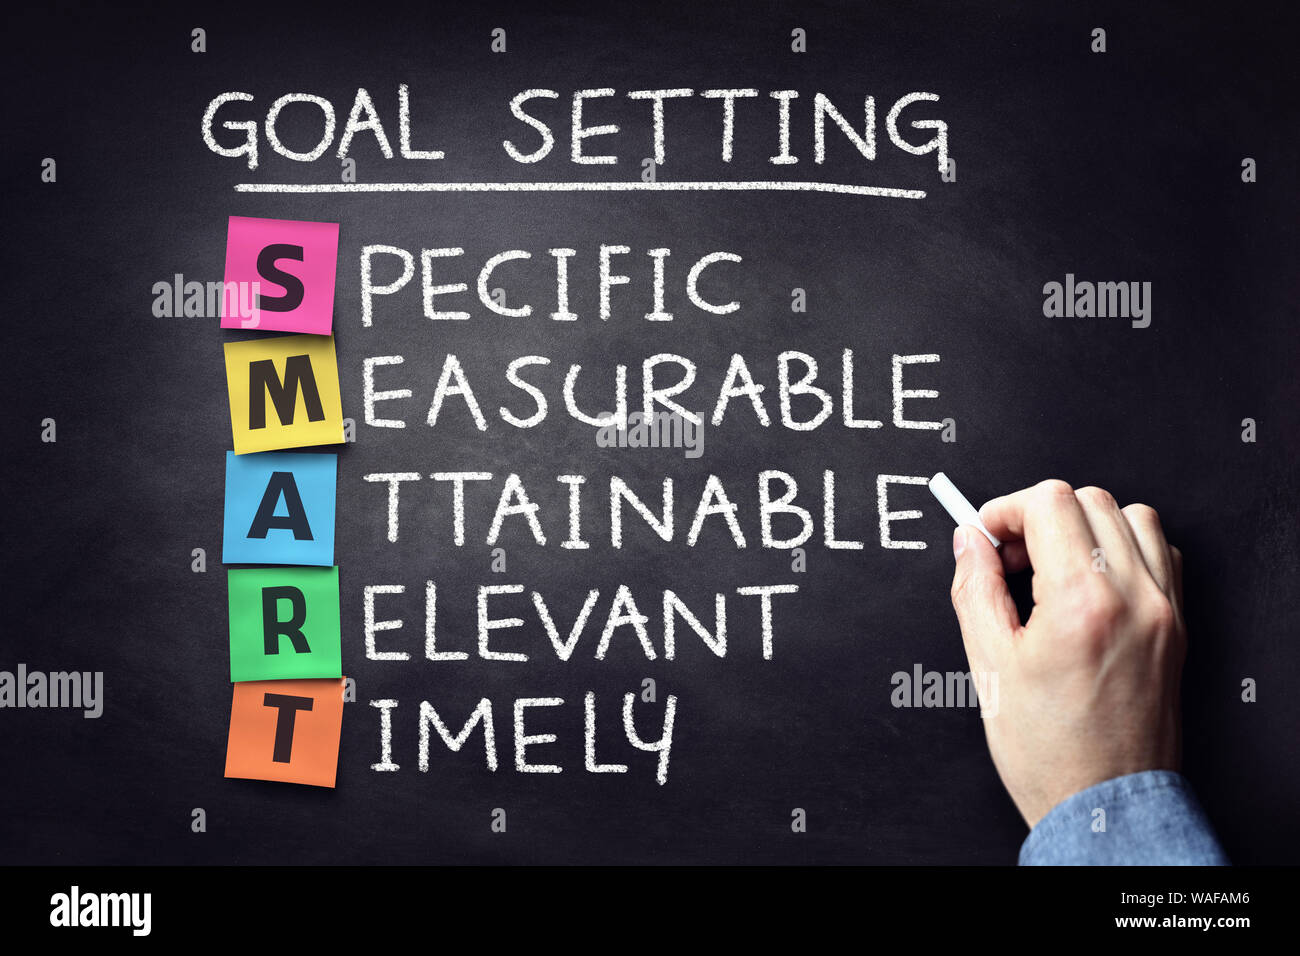 Smart business goal setting project management concept on blackboard Stock Photo